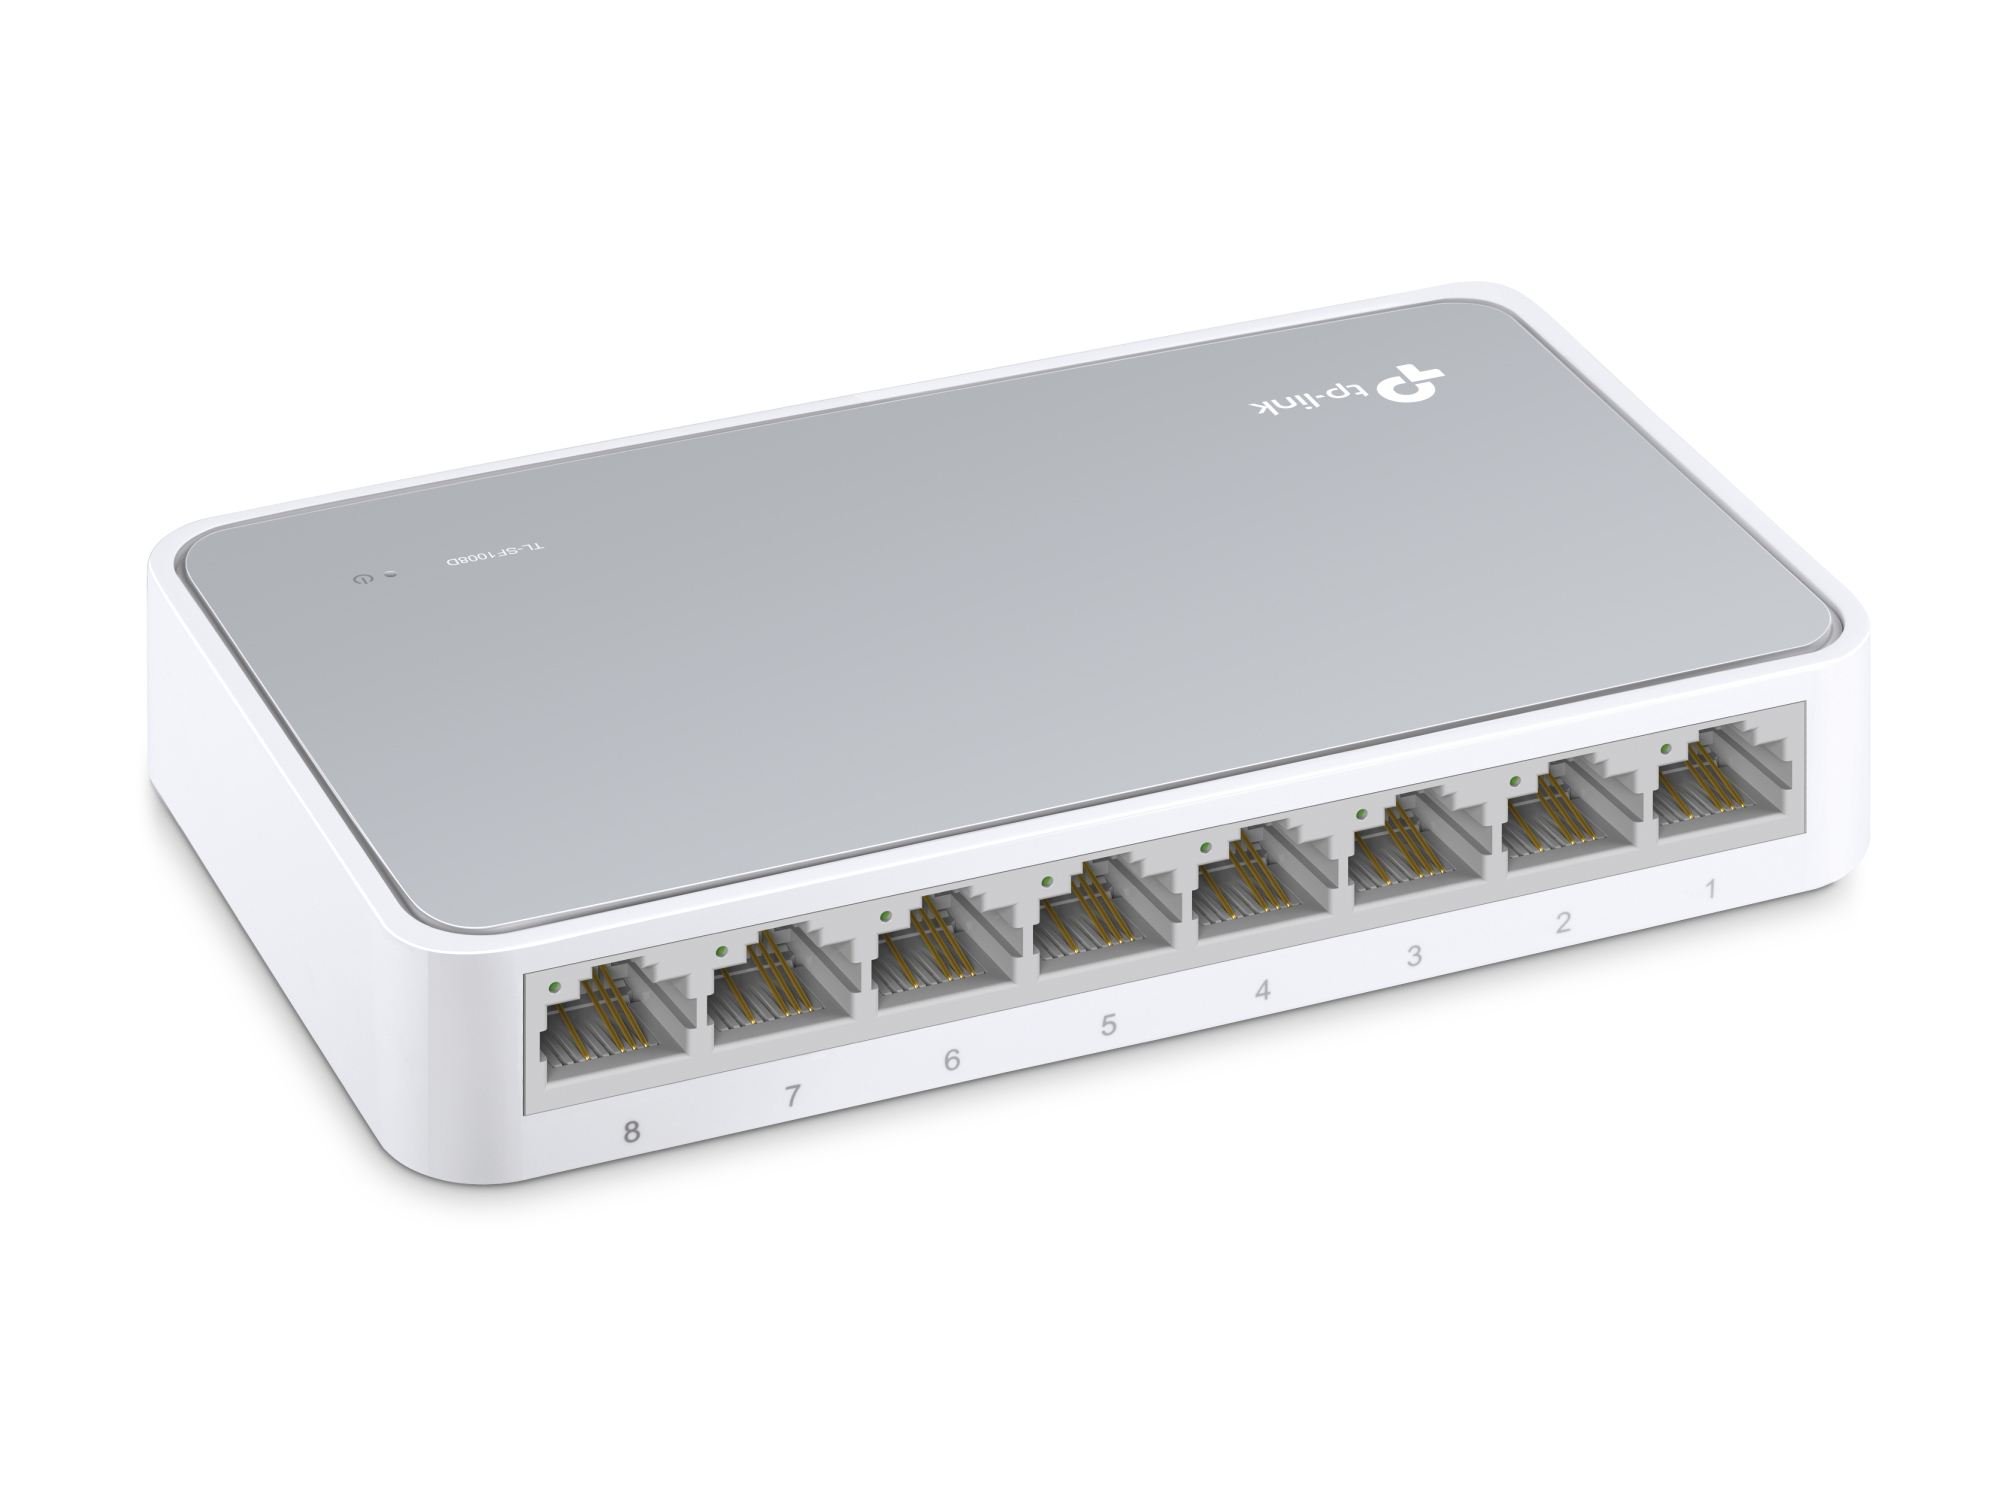 TP-LINK TL-SF1008D 10/100Mbps 8xPort Switch